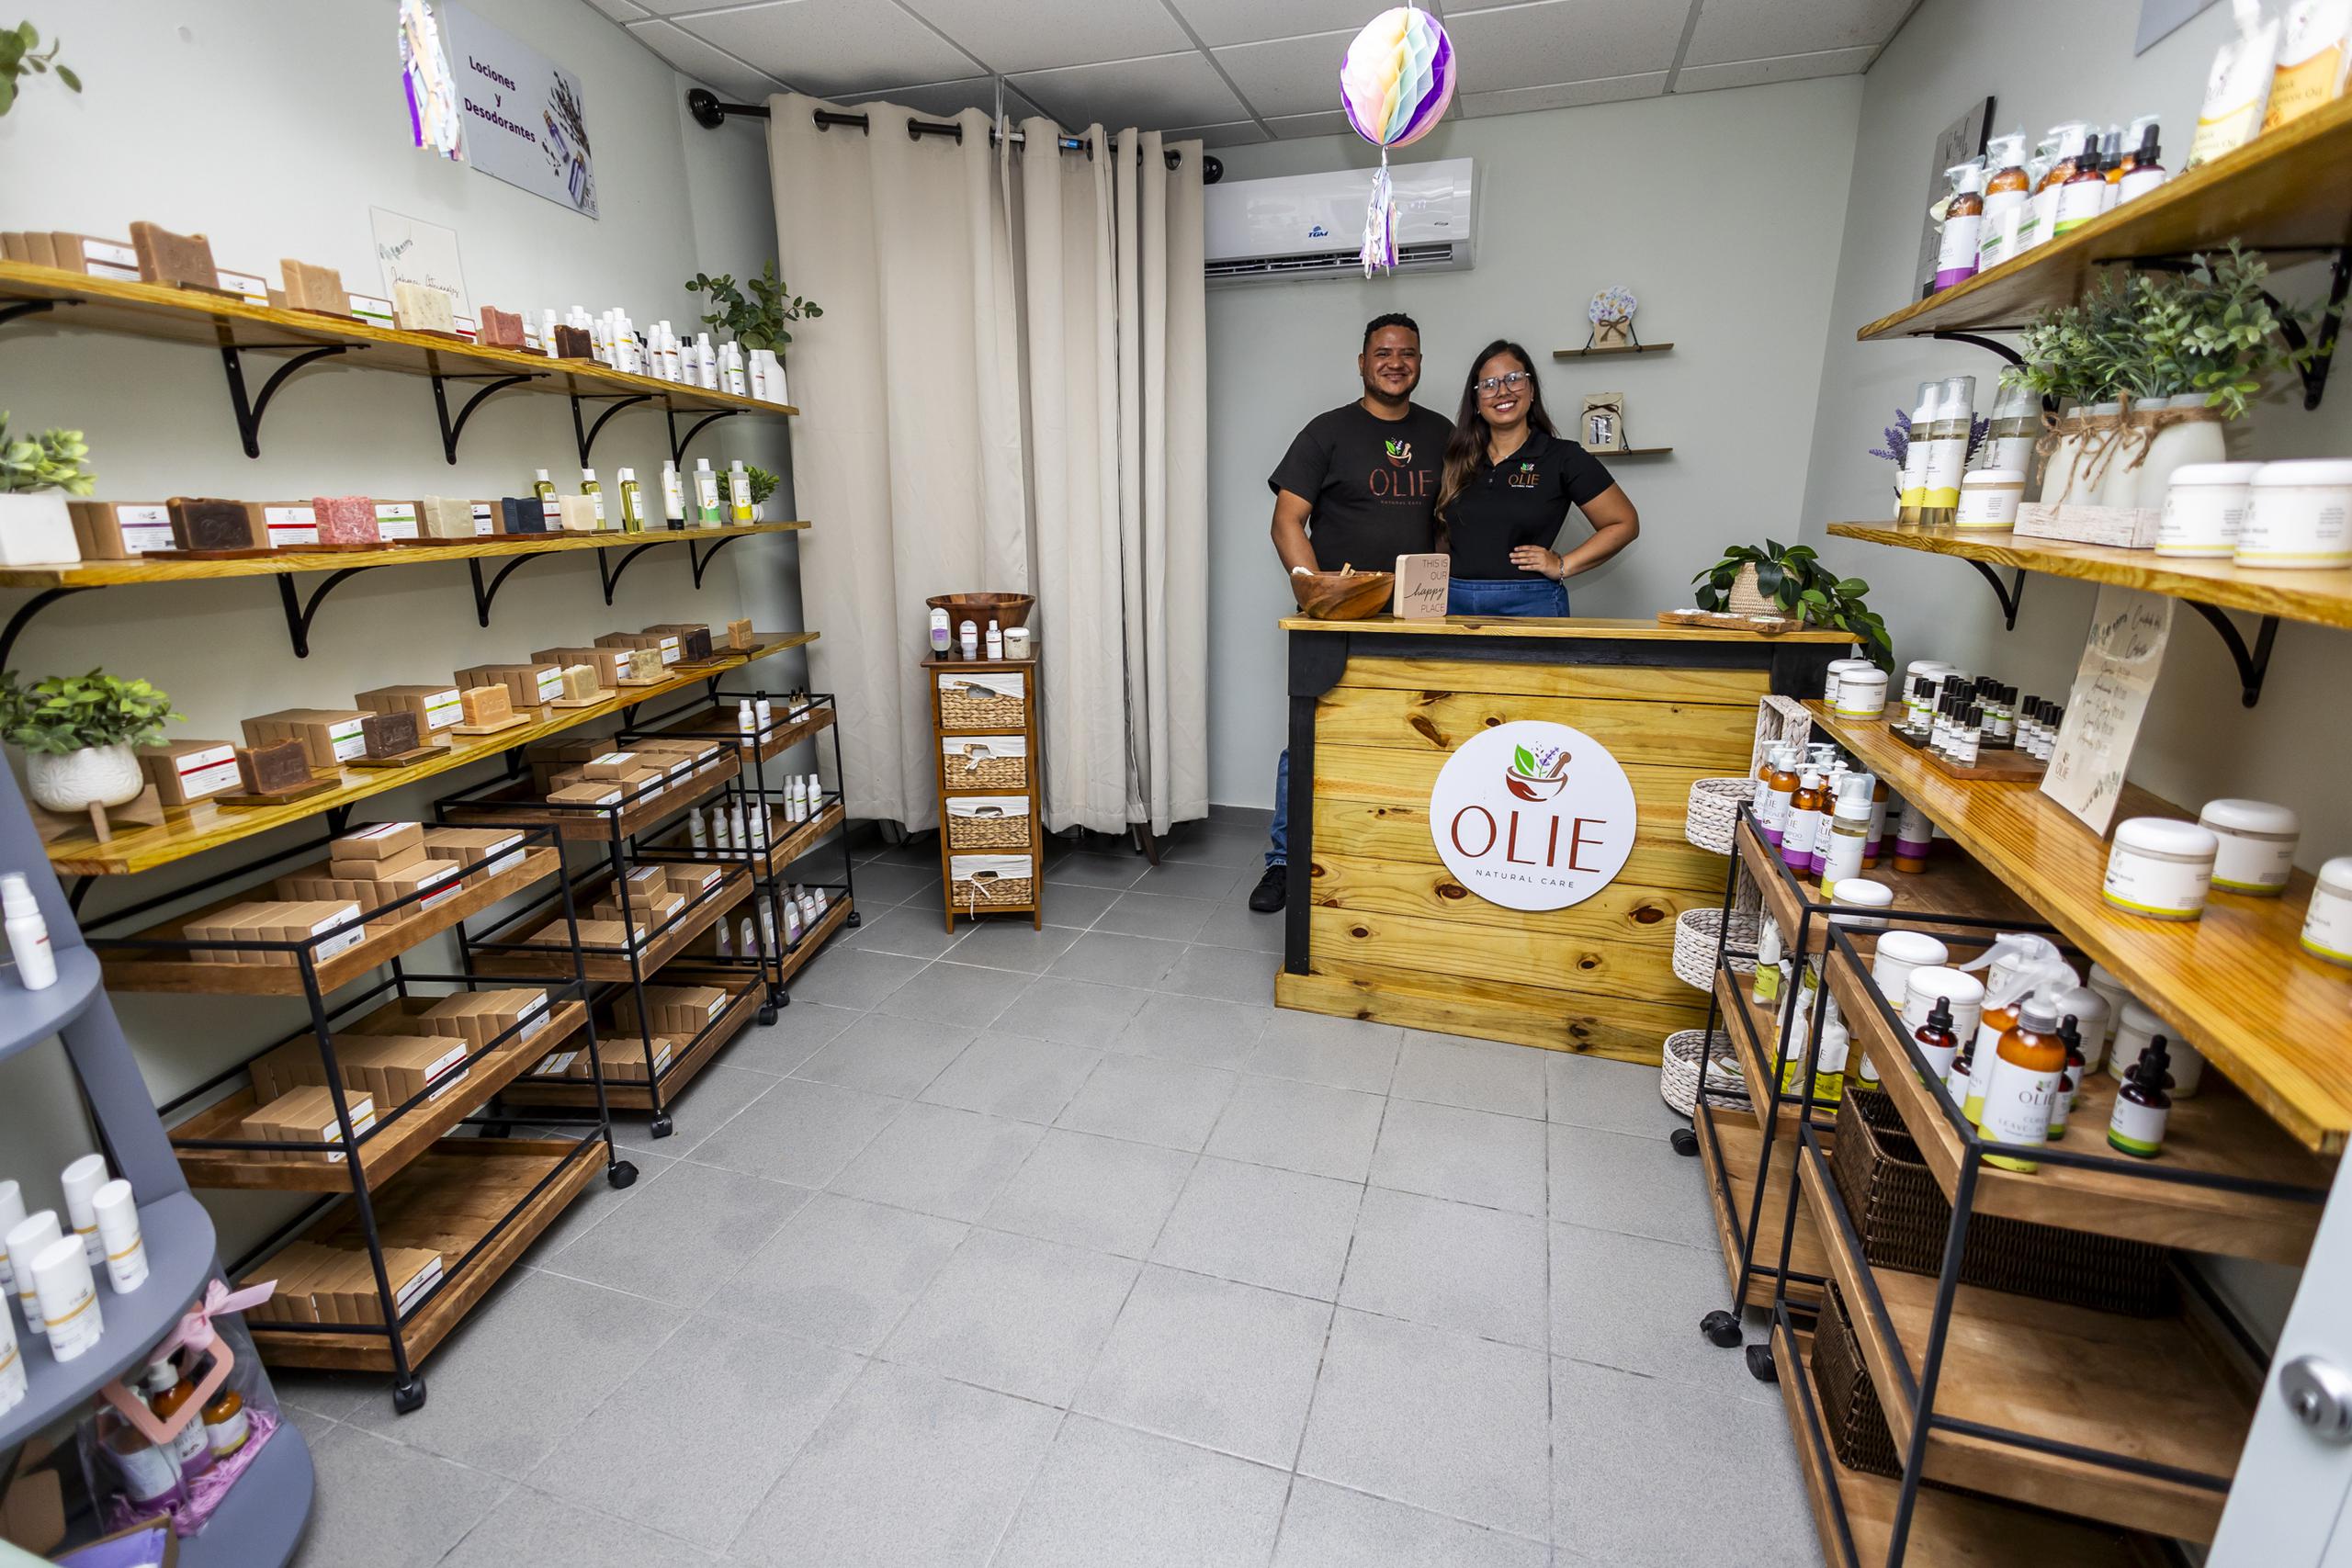 The Items Can Be Obtained Through The Website Oliesoaps.com And The Physical Store, Located In Plaza Artesanal Rafael Hernández Reyes In Camuy.